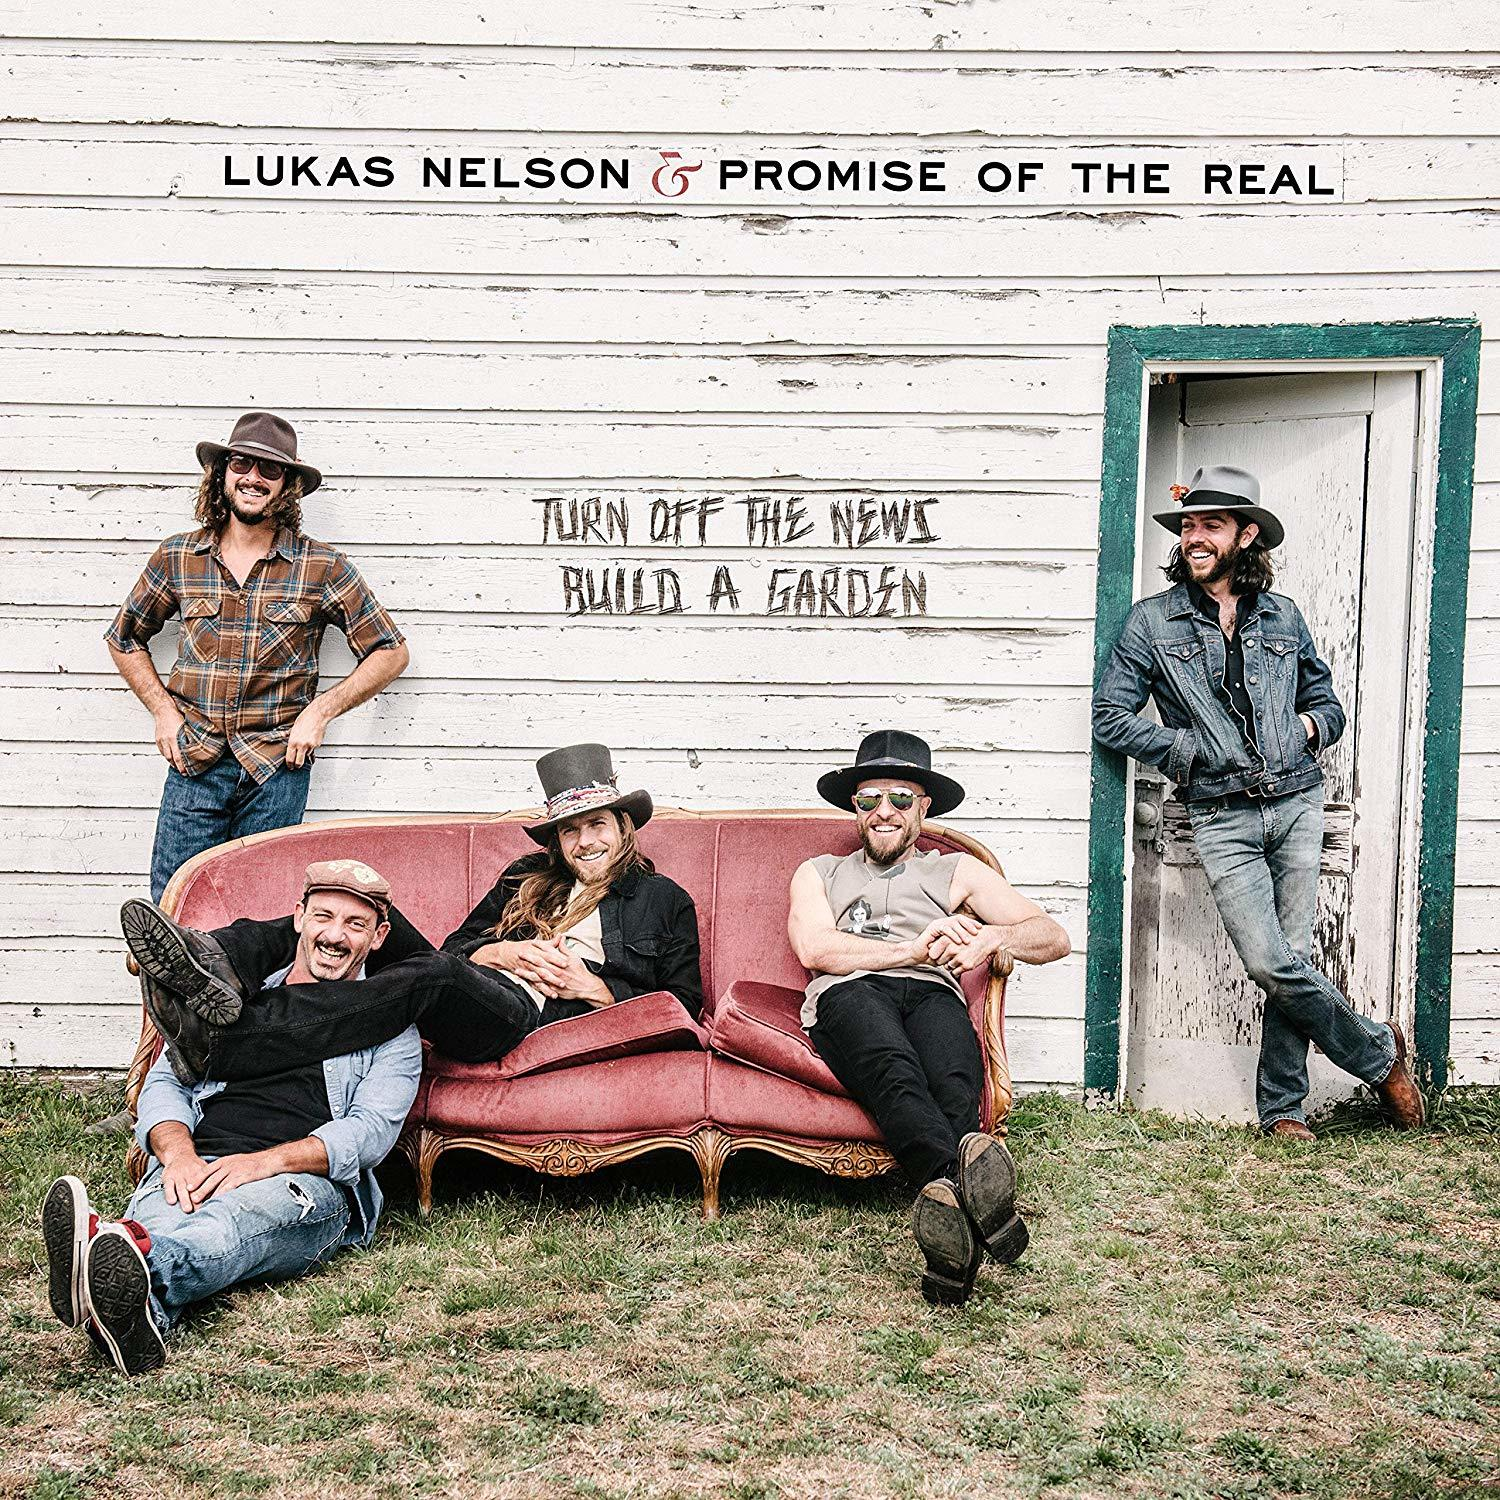 Lukas & Promise Of Turn News (2LP) Off Real (Vinyl) The (Build - Nelson Garden) The A 